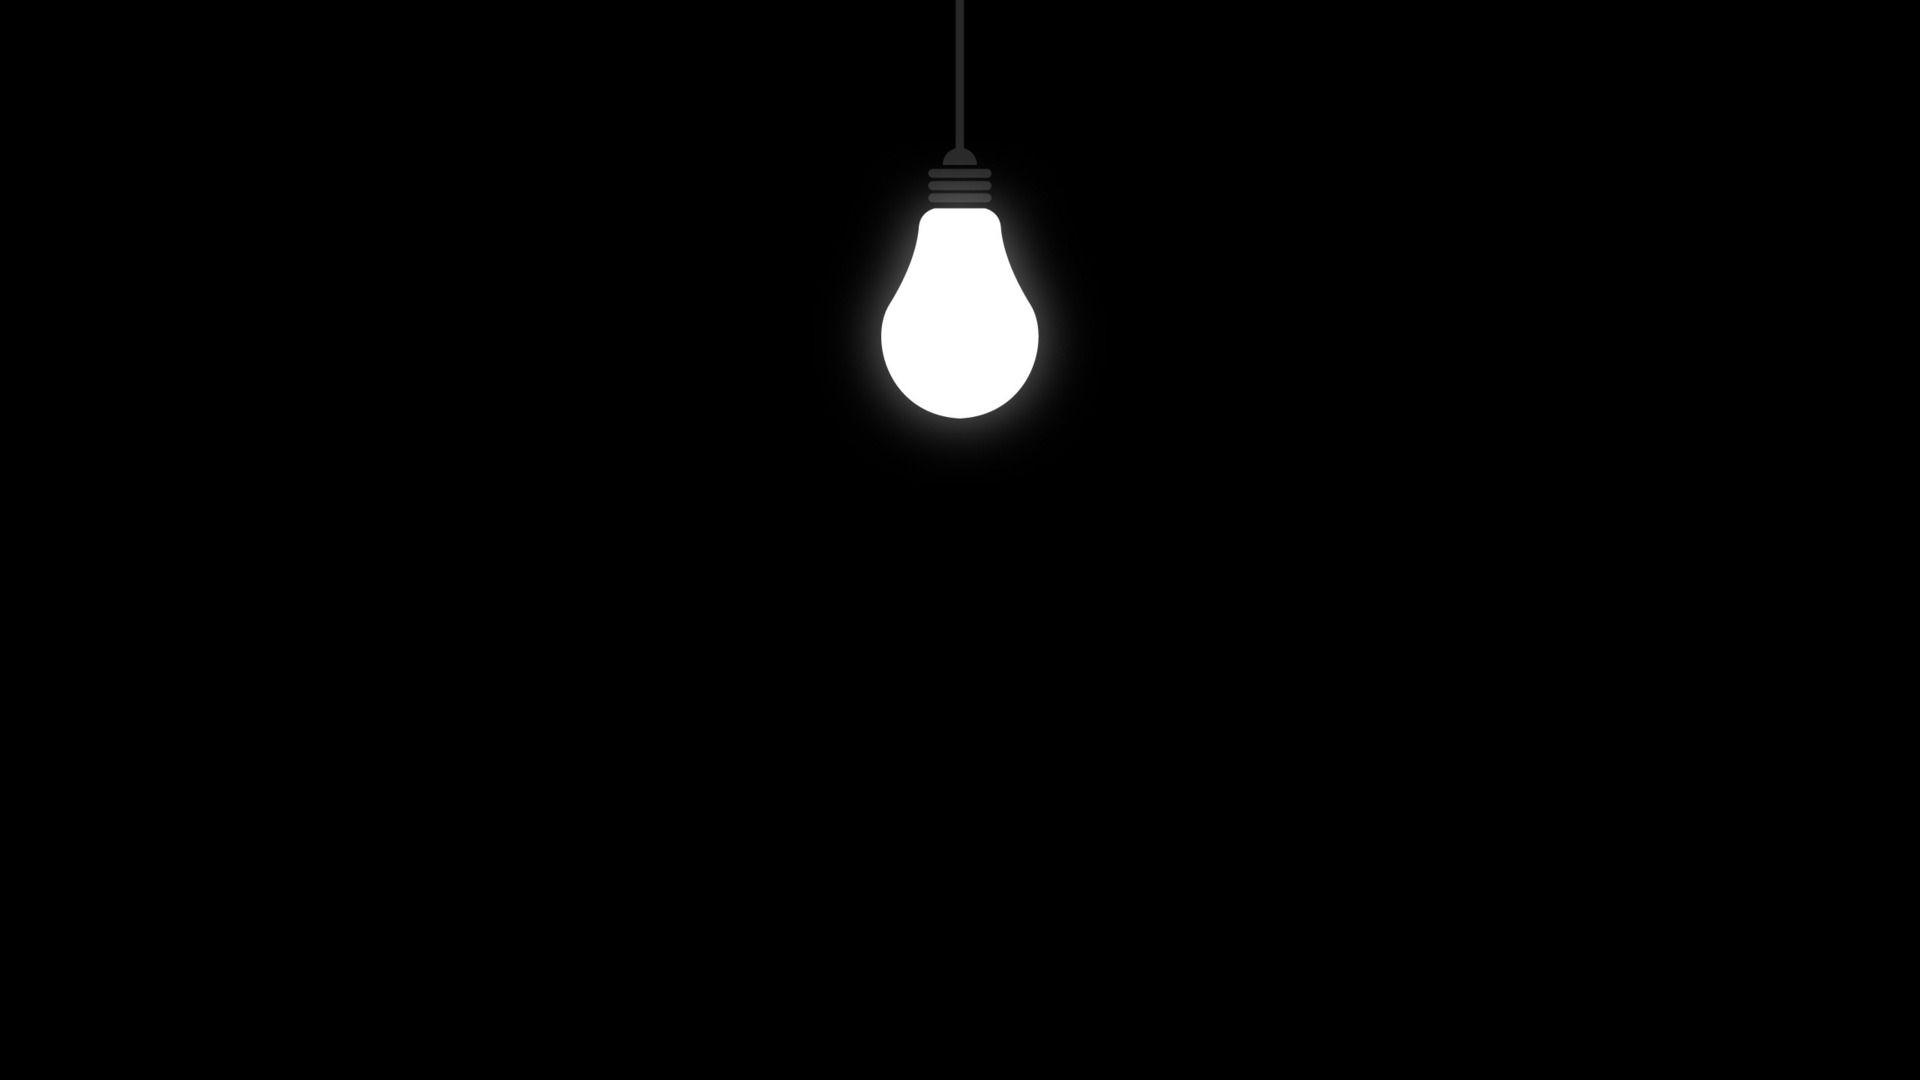 20 Light bulb wallpapers HD  Download Free backgrounds